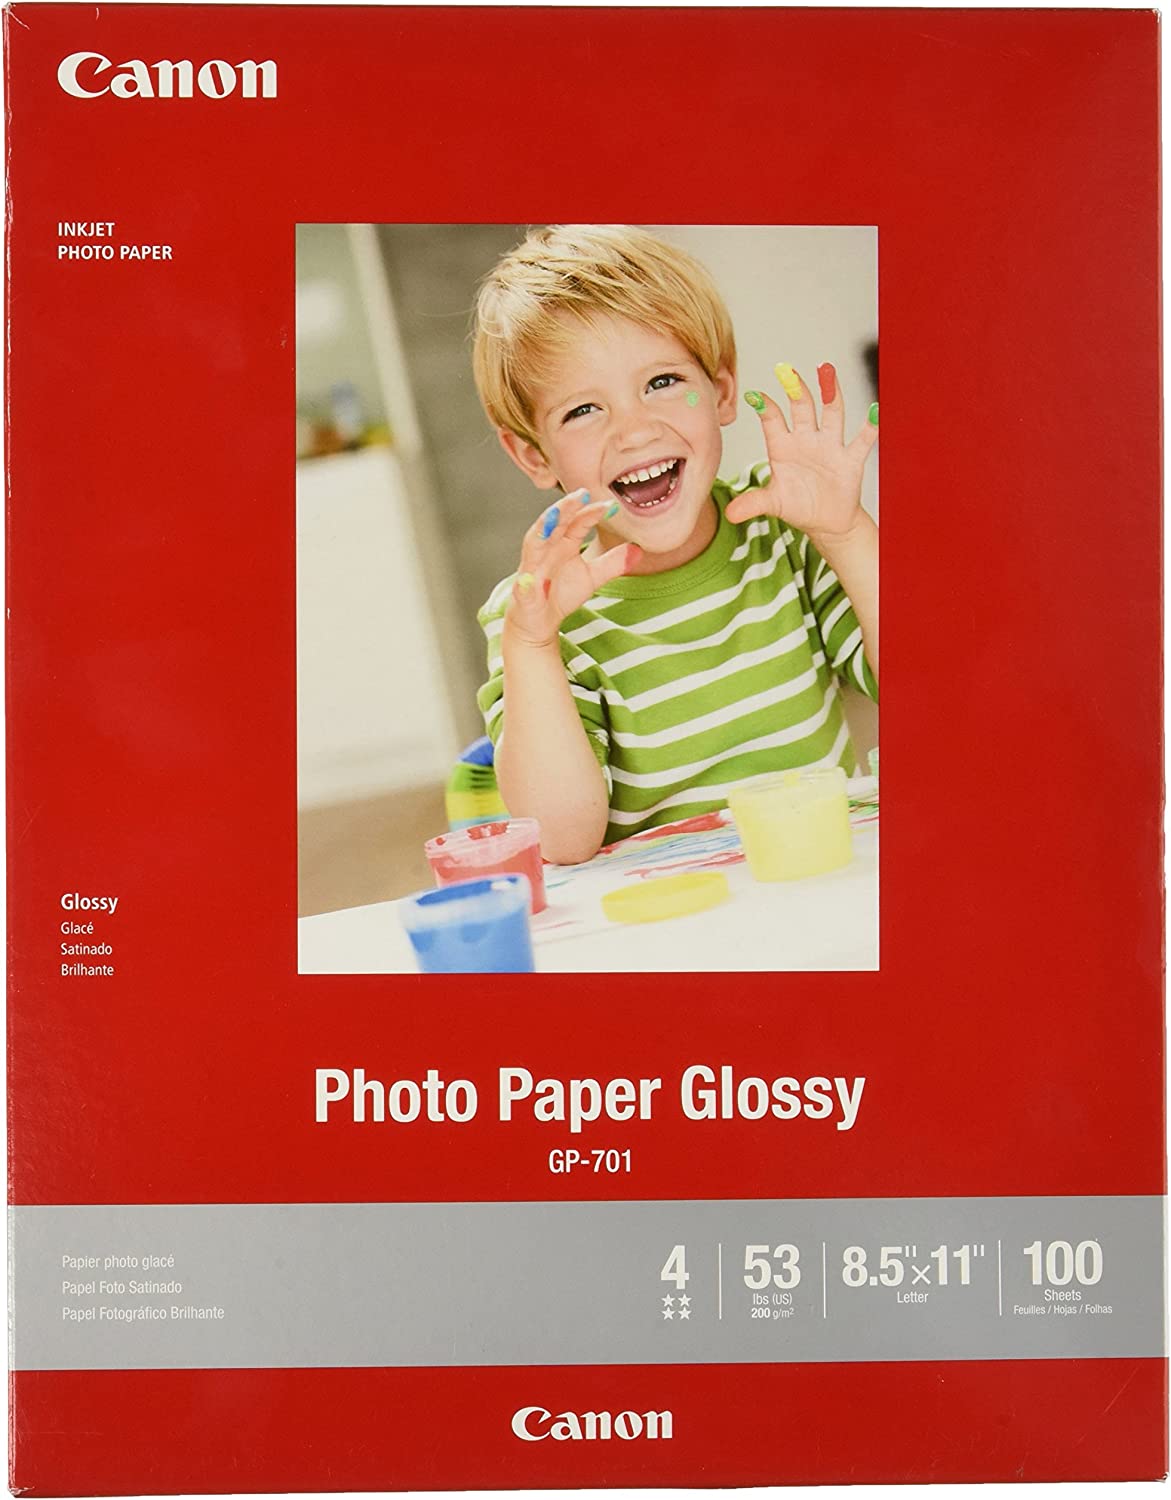 HP Matte Photo Paper, 4x6 in, 25 Sheets (6QH46A)